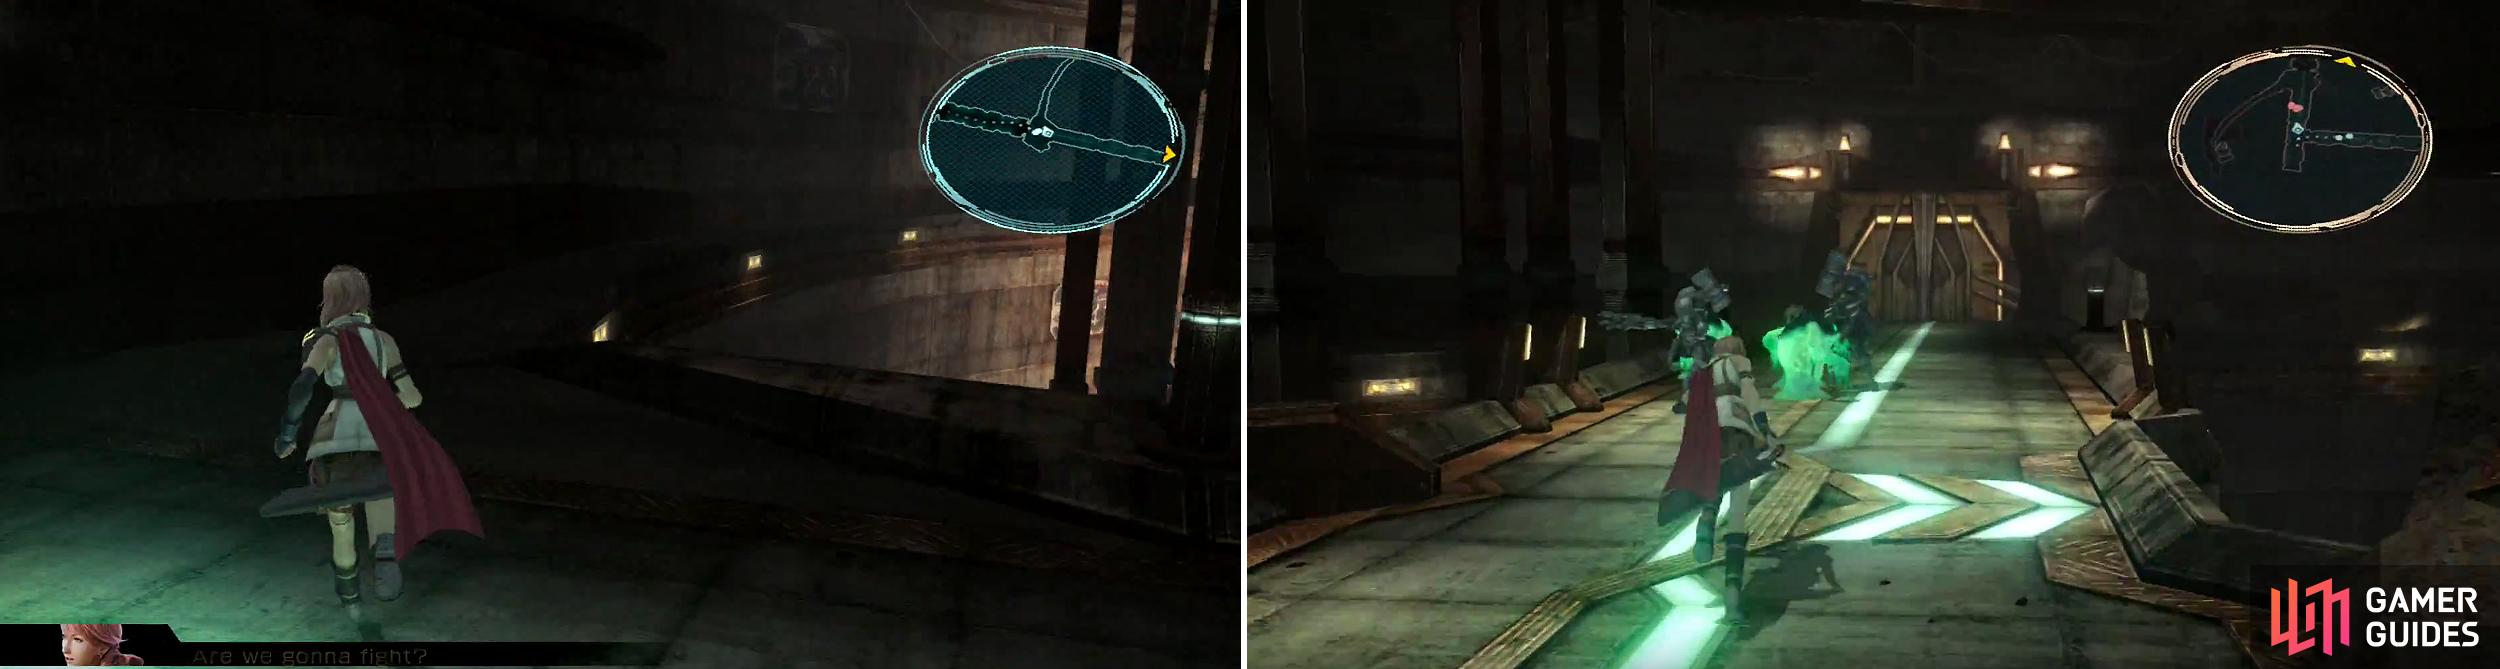 Use the ledges here (left) if you want a shortcut. If not, sneak up on the enemies fighting each other (right).